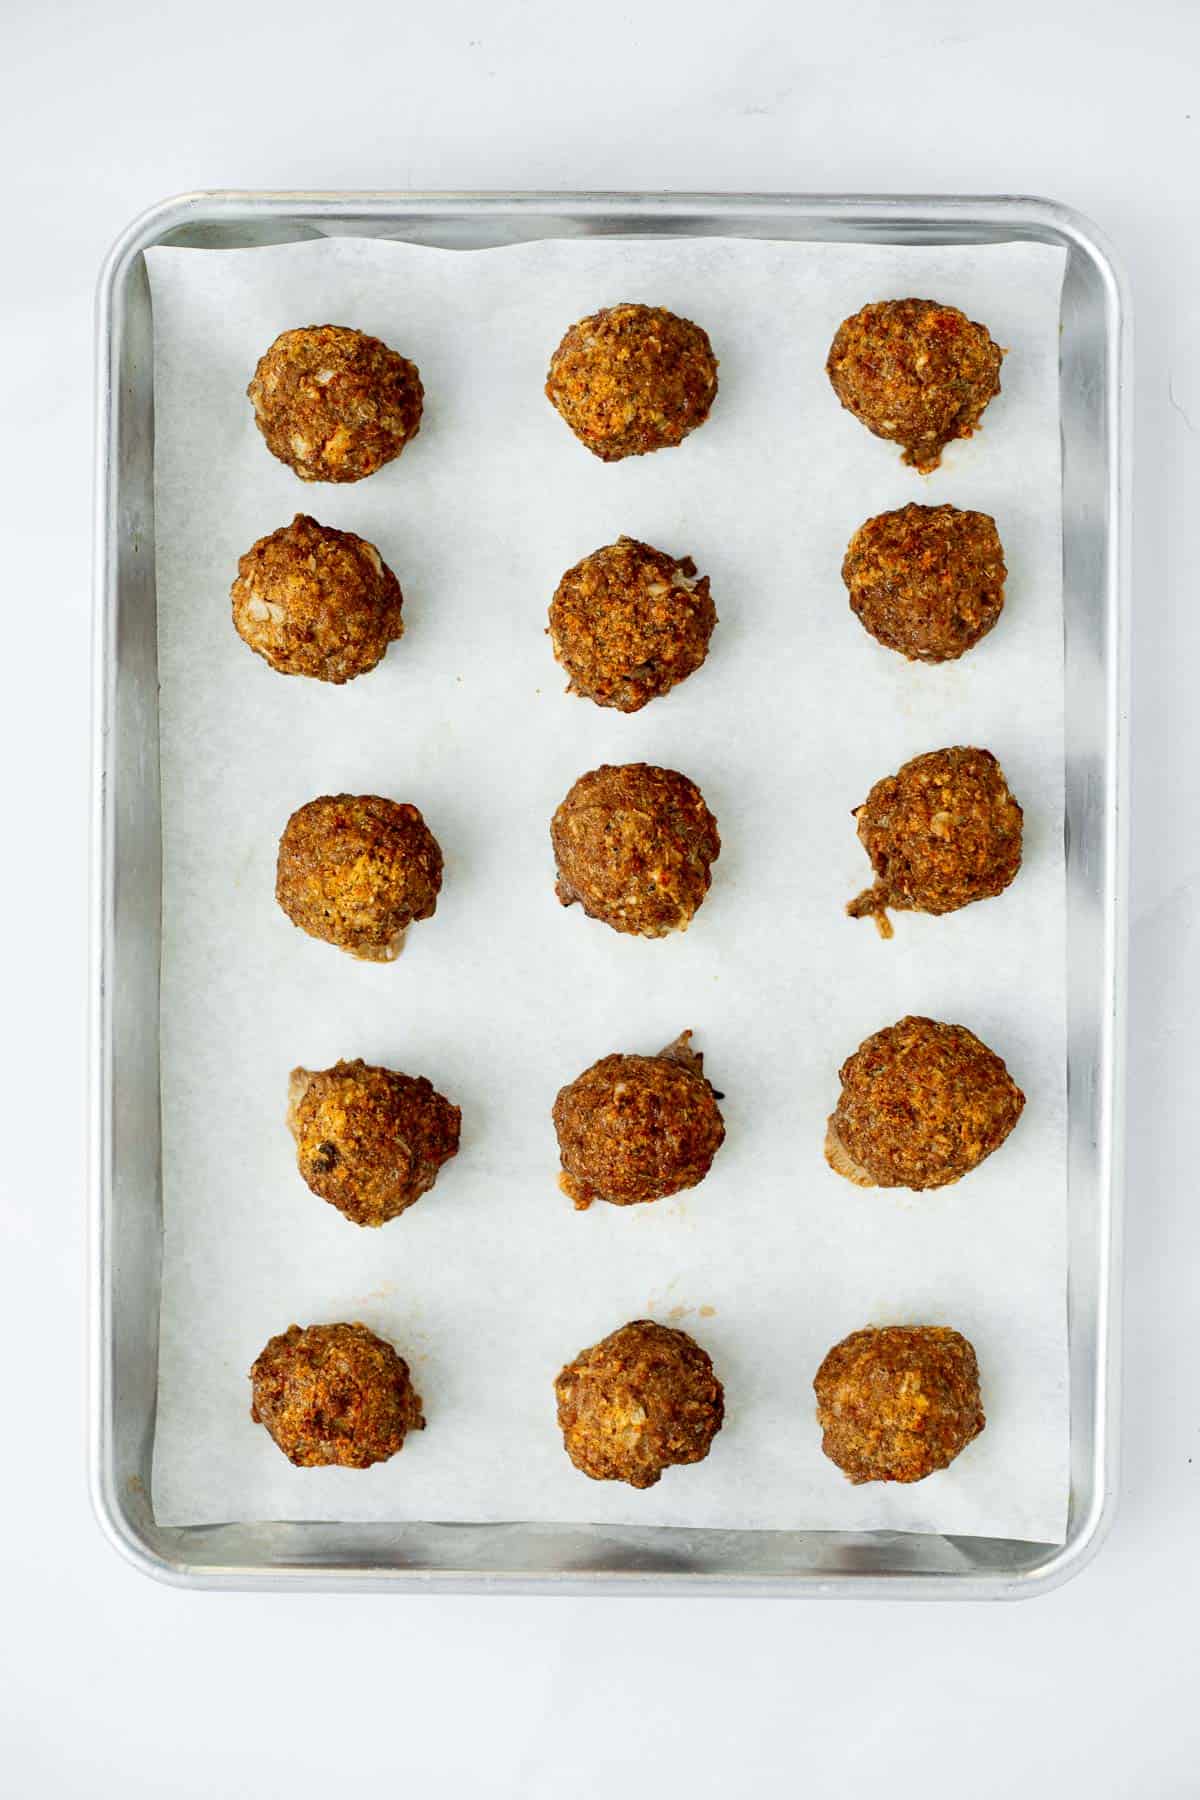 baked gluten free meatballs on a parchment lined baking sheet.